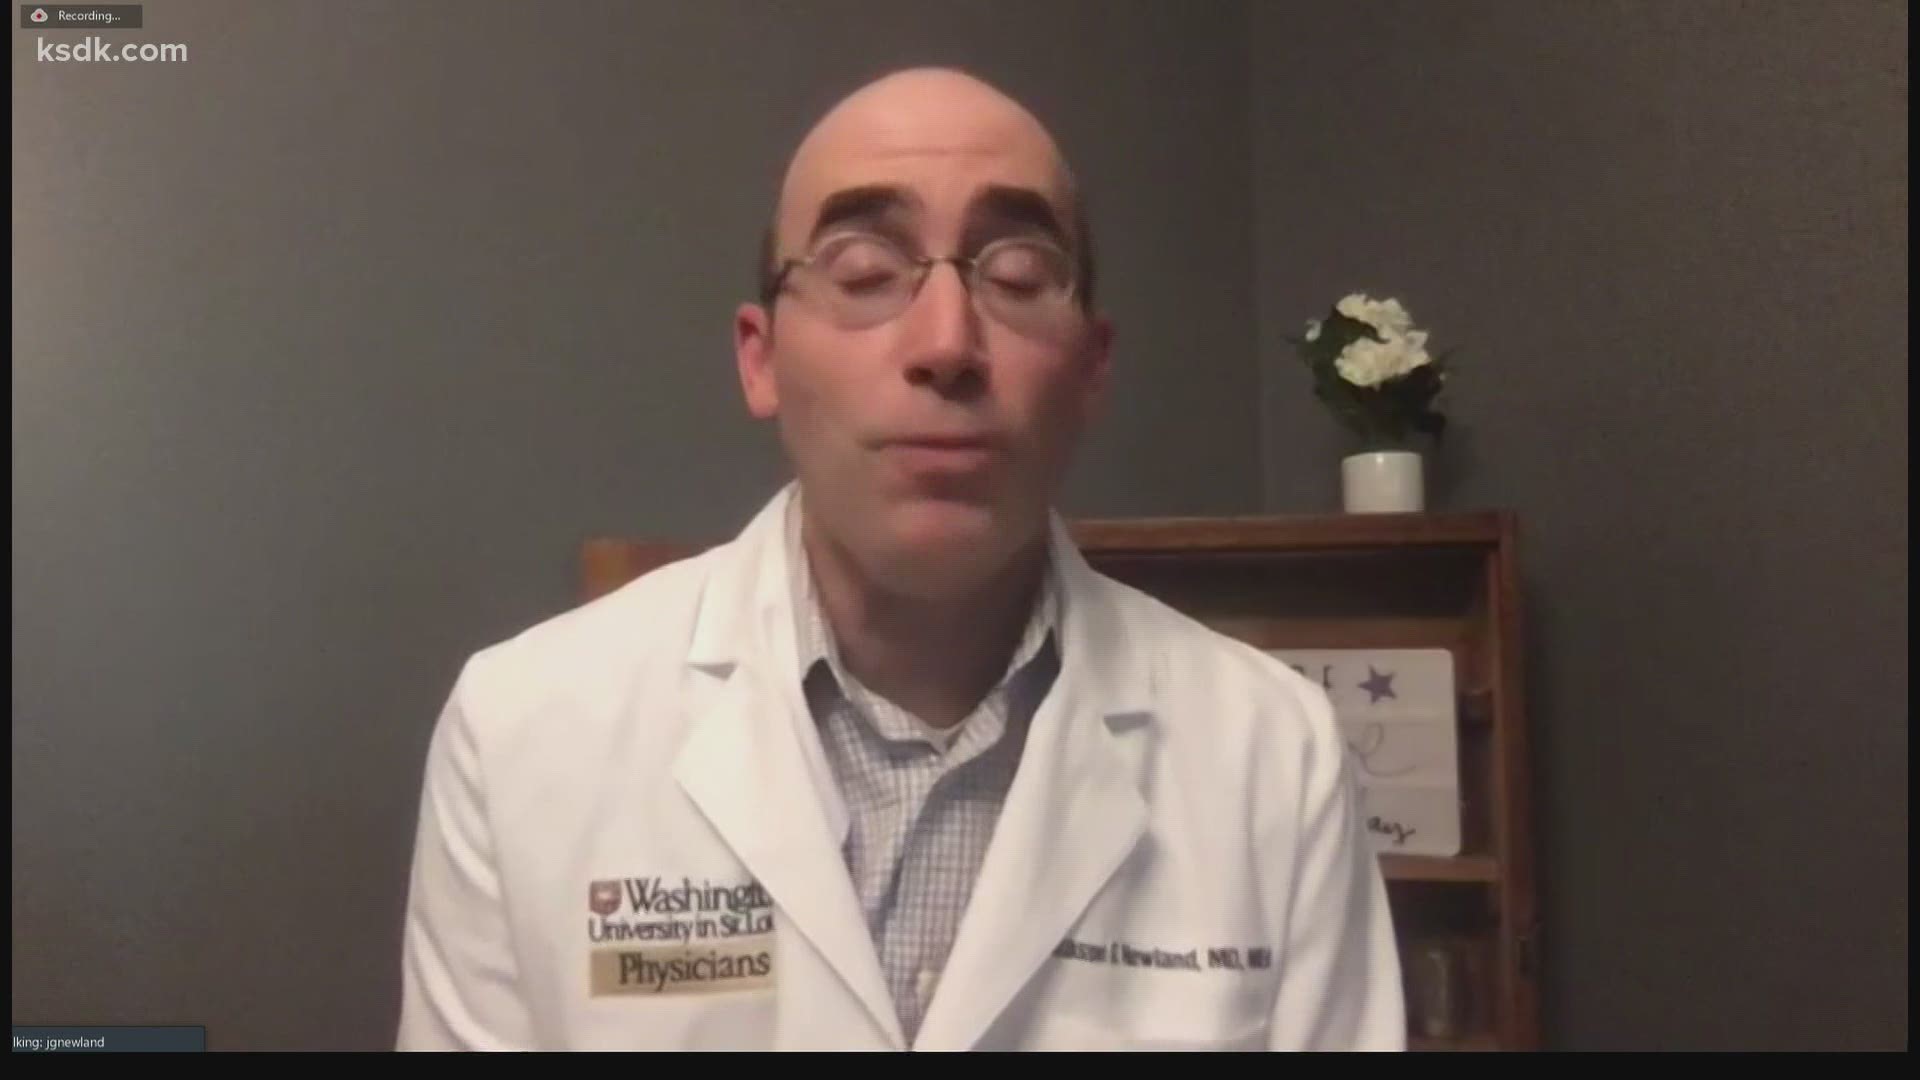 Dr. Jason Newland with Washington University joined 5 On Your Side to answer your COVID-19 questions.